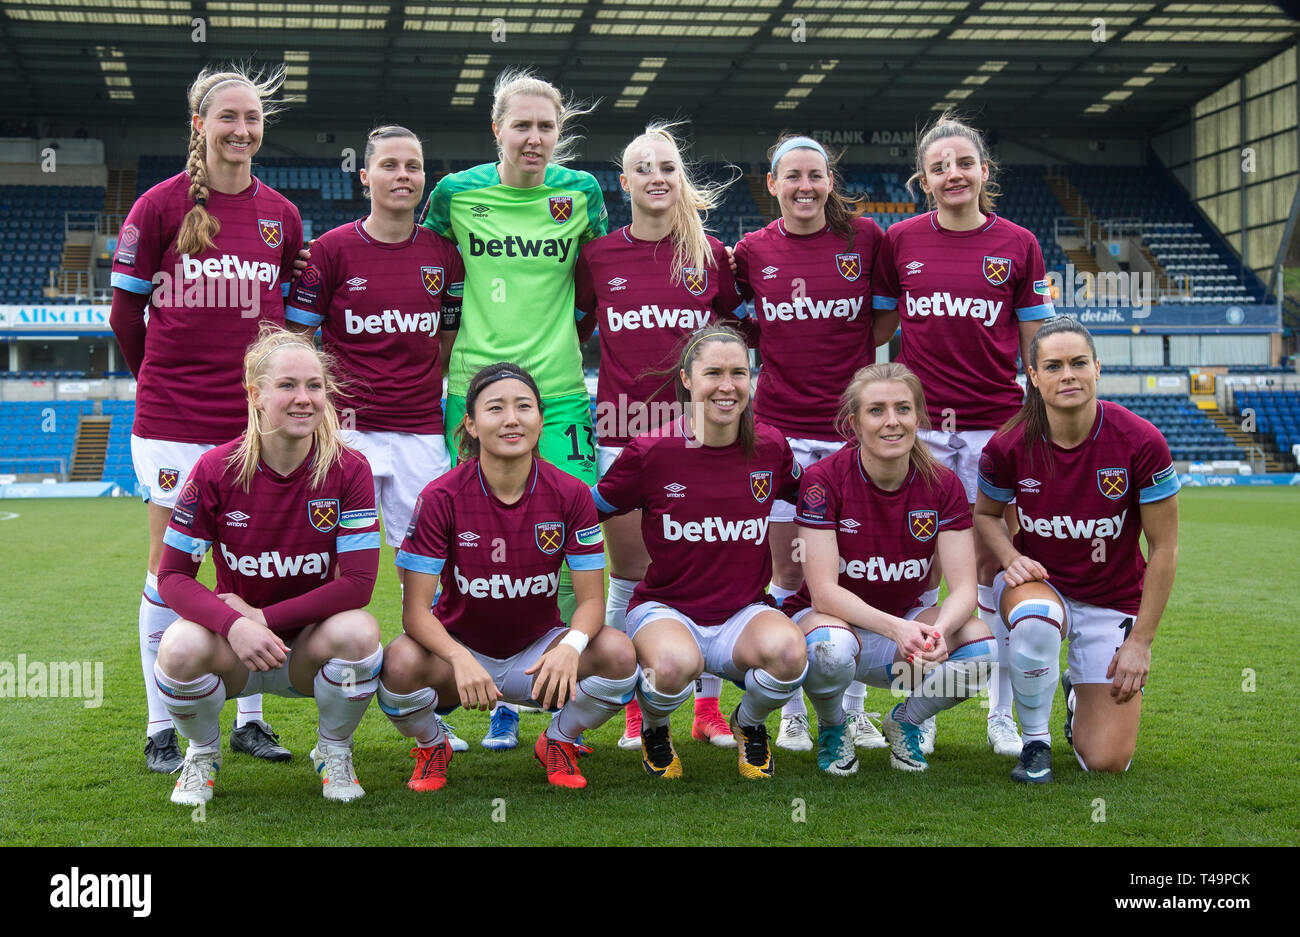 High Wycombe, UK. 14th Apr, 2019. West Ham United women pre match team photo (back row l-r) Brroke Hendrix, Gill Flaherty, Goalkeeper Anna Moorhouse, Alisha Lehmann, Erin Simon and Jane Ross (front row l-r) Lucienne Reichardt, Cho So-Hyun, Jane Ross, Kate Longhurst & Claire Rafferty during the Women's FA Cup Semi-Final match between Reading Women and West Ham United at Adams Park, High Wycombe, England on 14 April 2019. Credit: Action Foto Sport/Alamy Live News Stock Photo